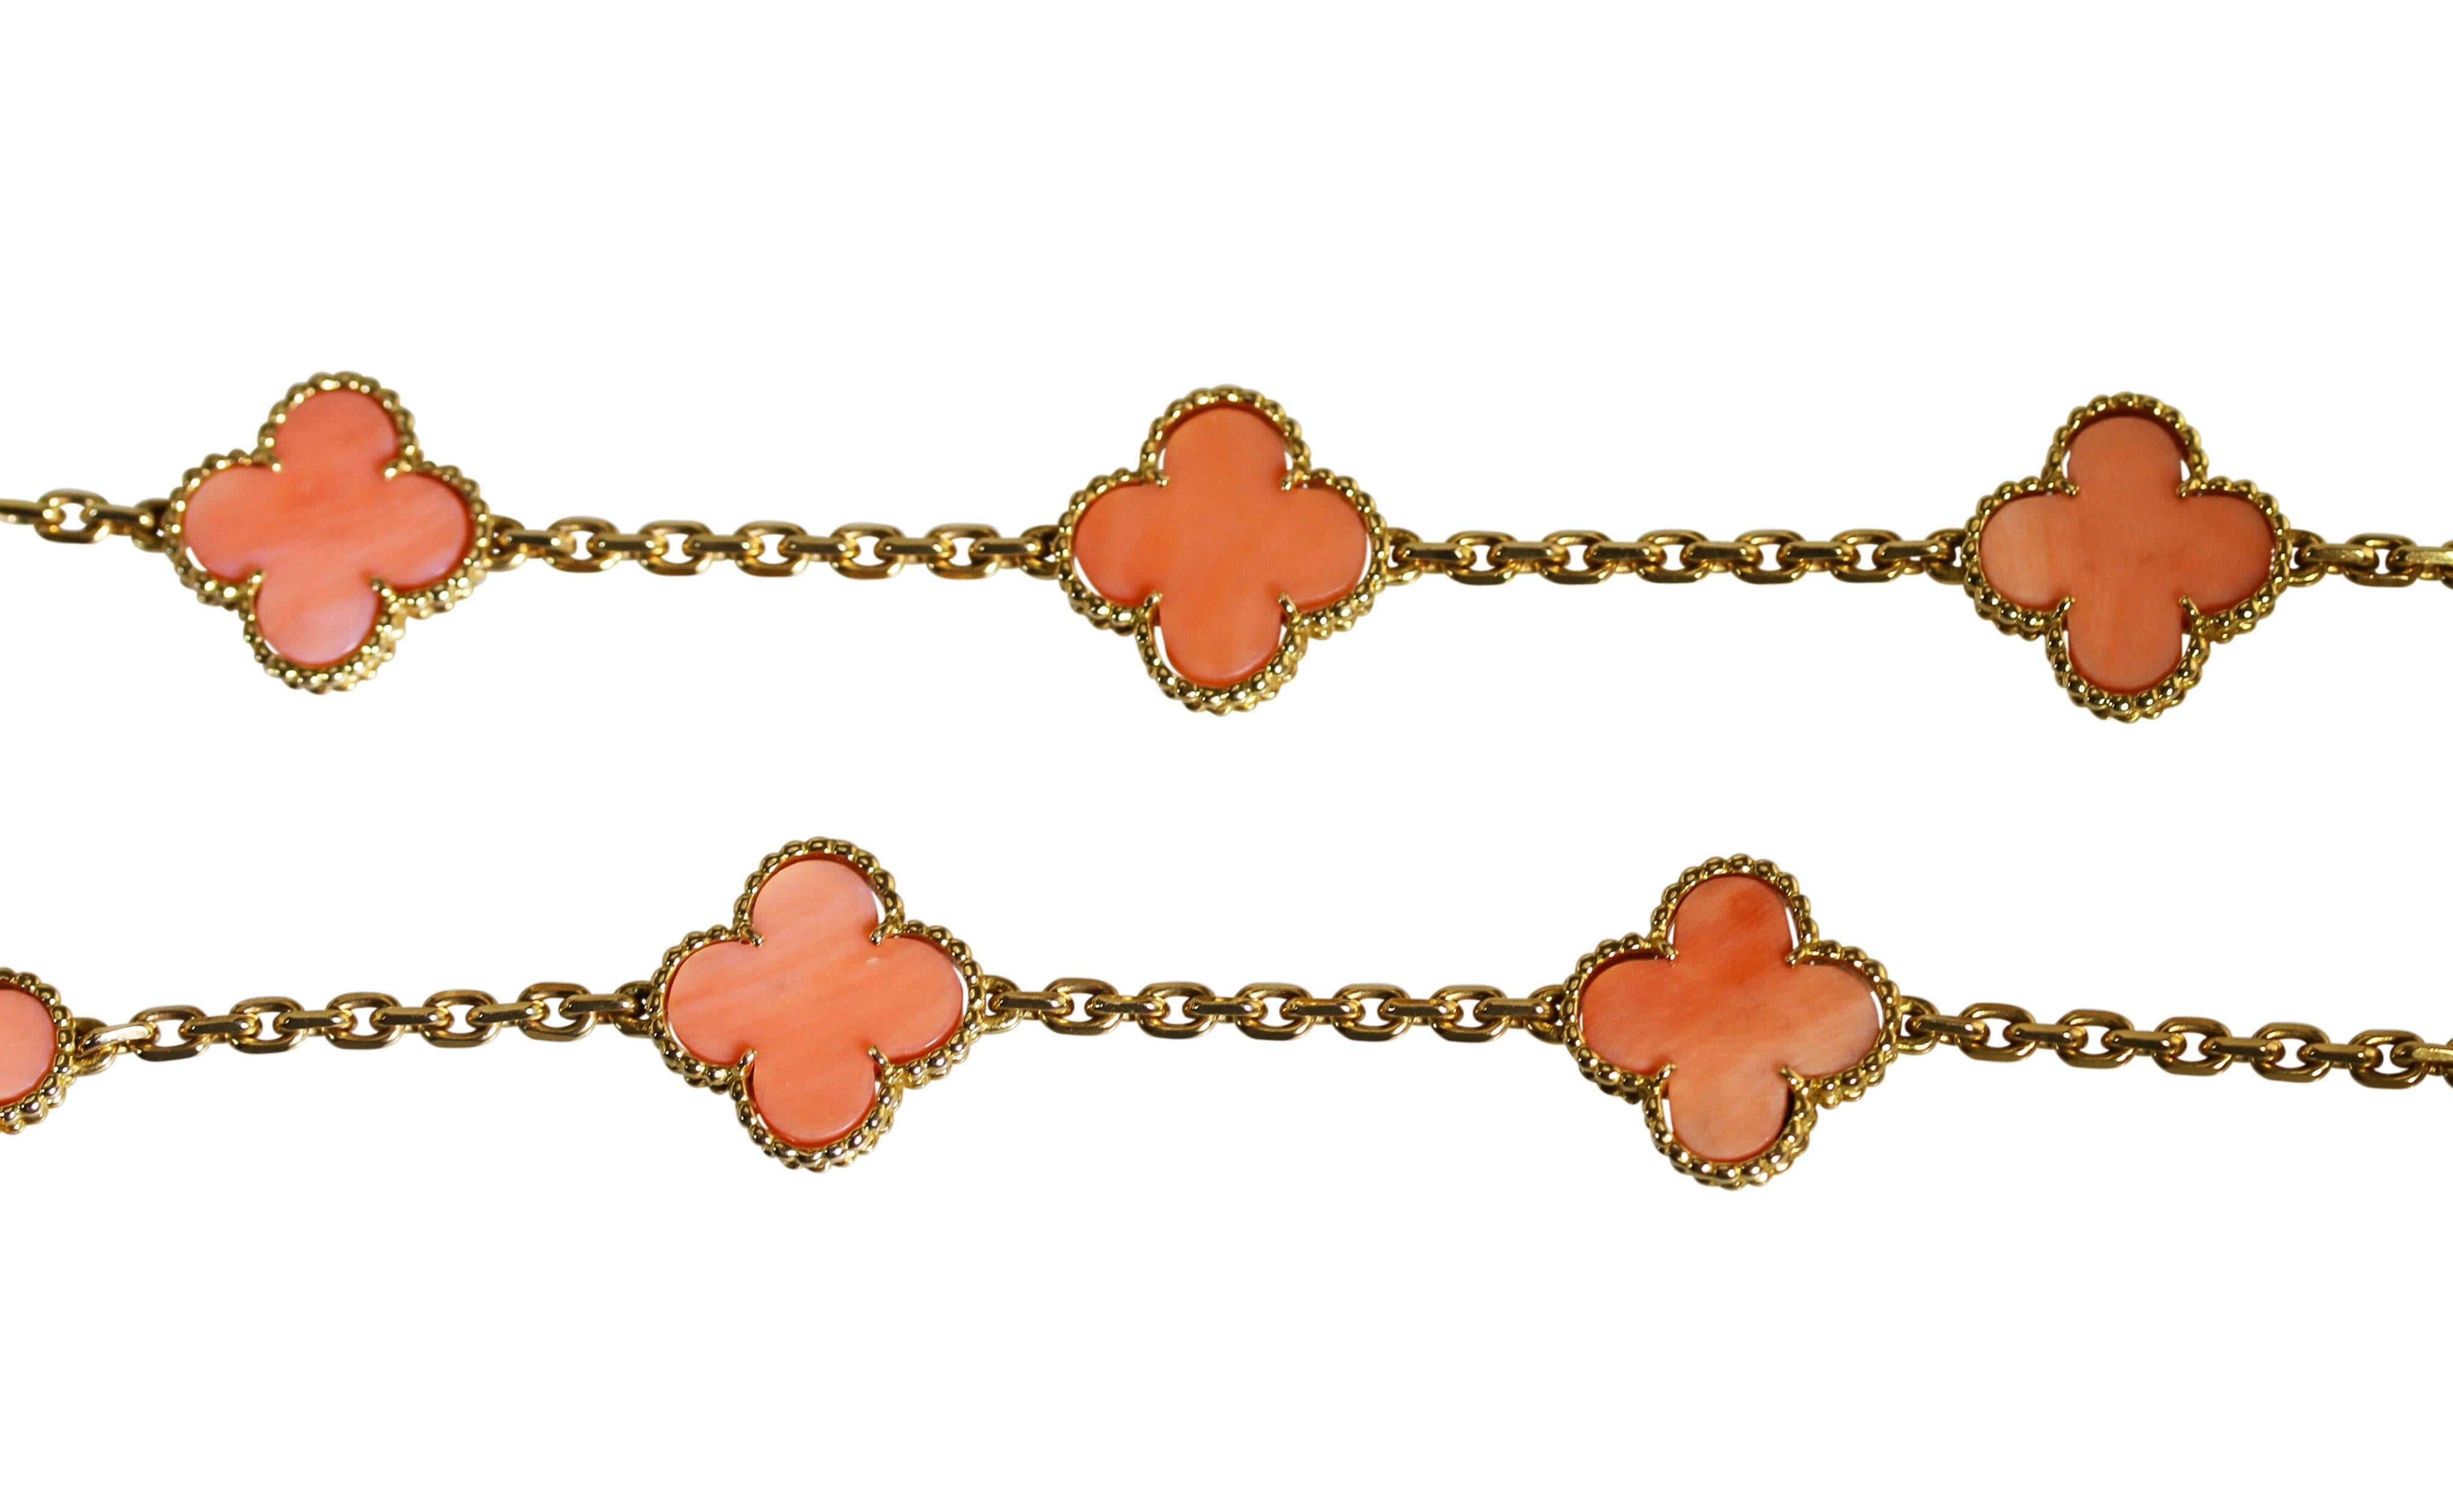 An 18 karat yellow gold and coral 'Alhambra' long chain necklace by Van Cleef & Arpels, France, circa 1993, composed of 20 carved coral motifs spaced by gold links, gross weight 46.5 grams, length 31 3/4 inches, width 5/8 inch, signed VCA, numbered